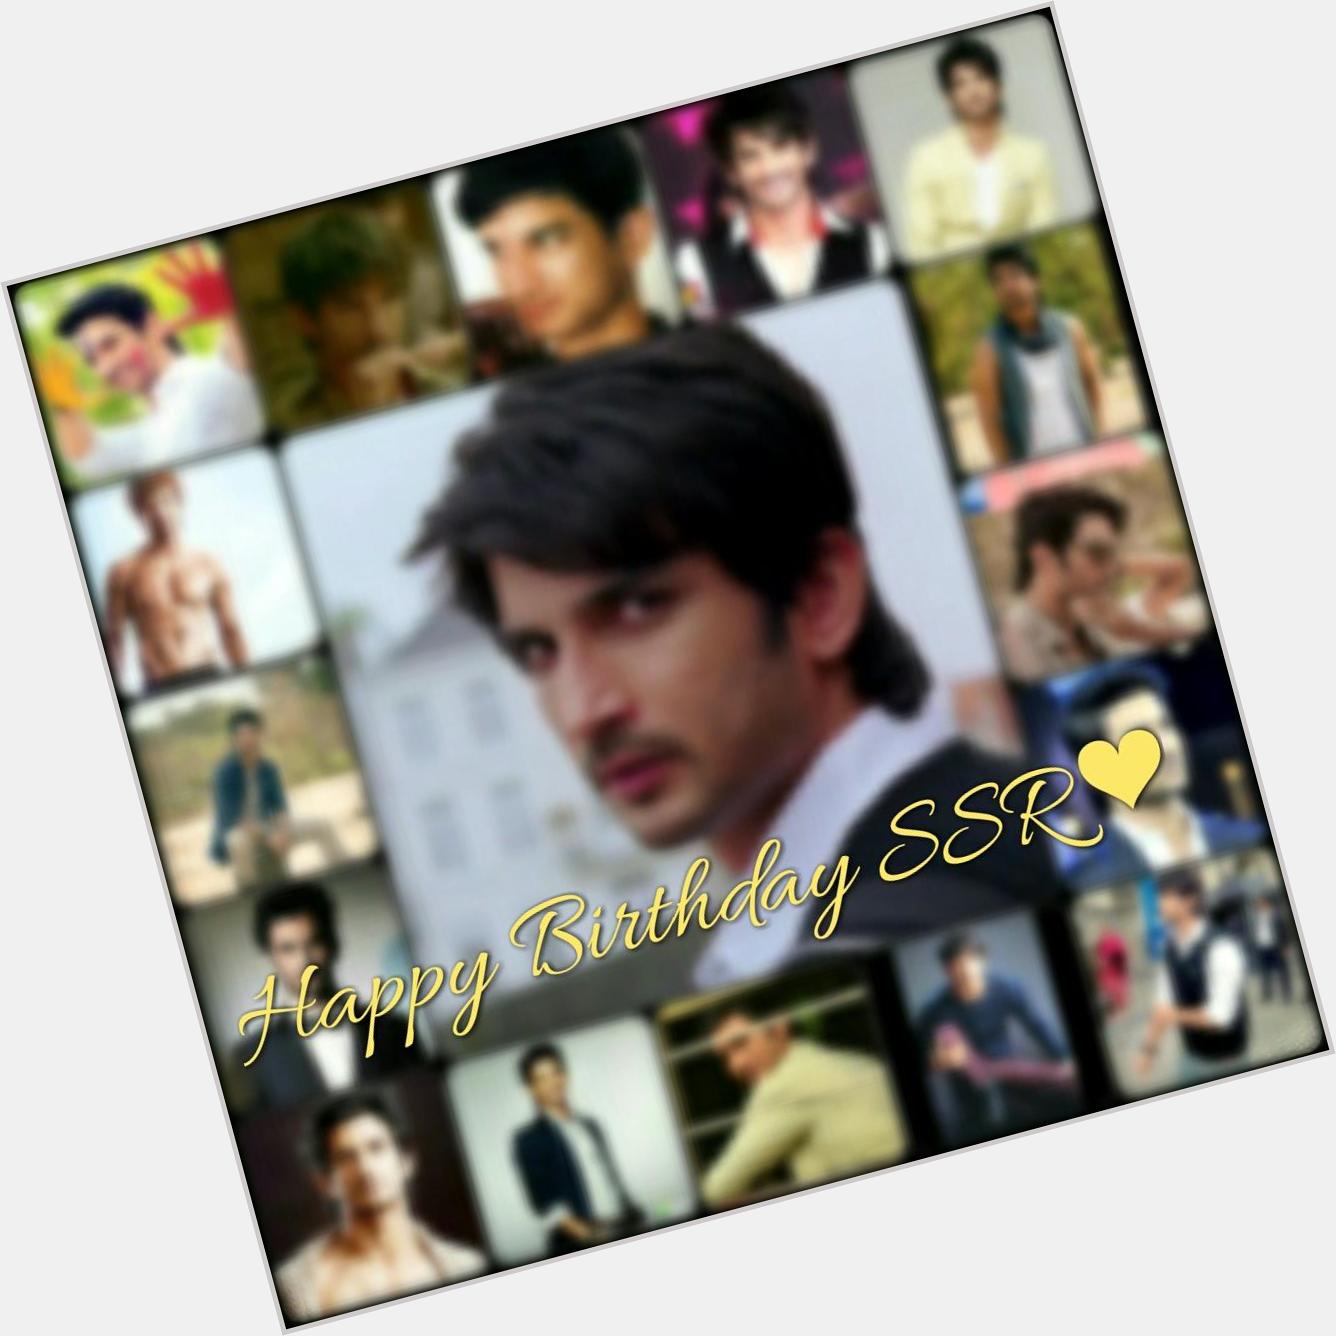  HAPPY BIRTHDAY SUSHANT SINGH RAJPUT . Its finally your birthday :\). I love you so much,forever & always 